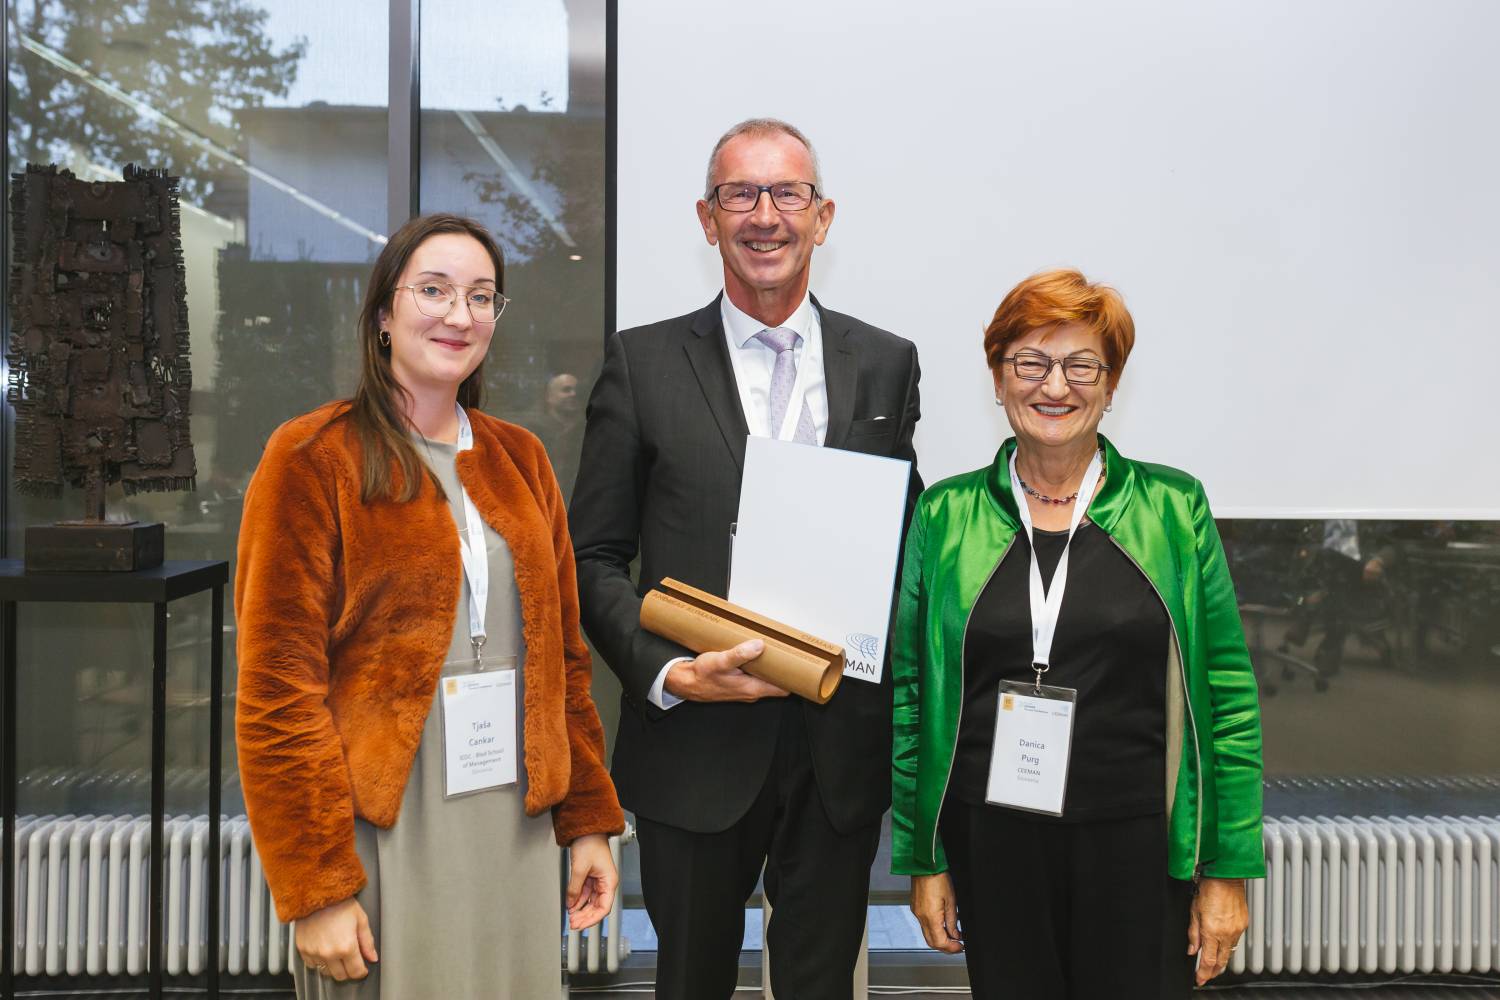 MCI rector Andreas Altmann receives Champion Award 'Academic Leader of the Year' 2022 (from left to right): Tjaša Cankar (IEDC - Bled School of Management), MCI rector Andreas Altmann, CEEMAN president Danica Purg ©CEEMAN